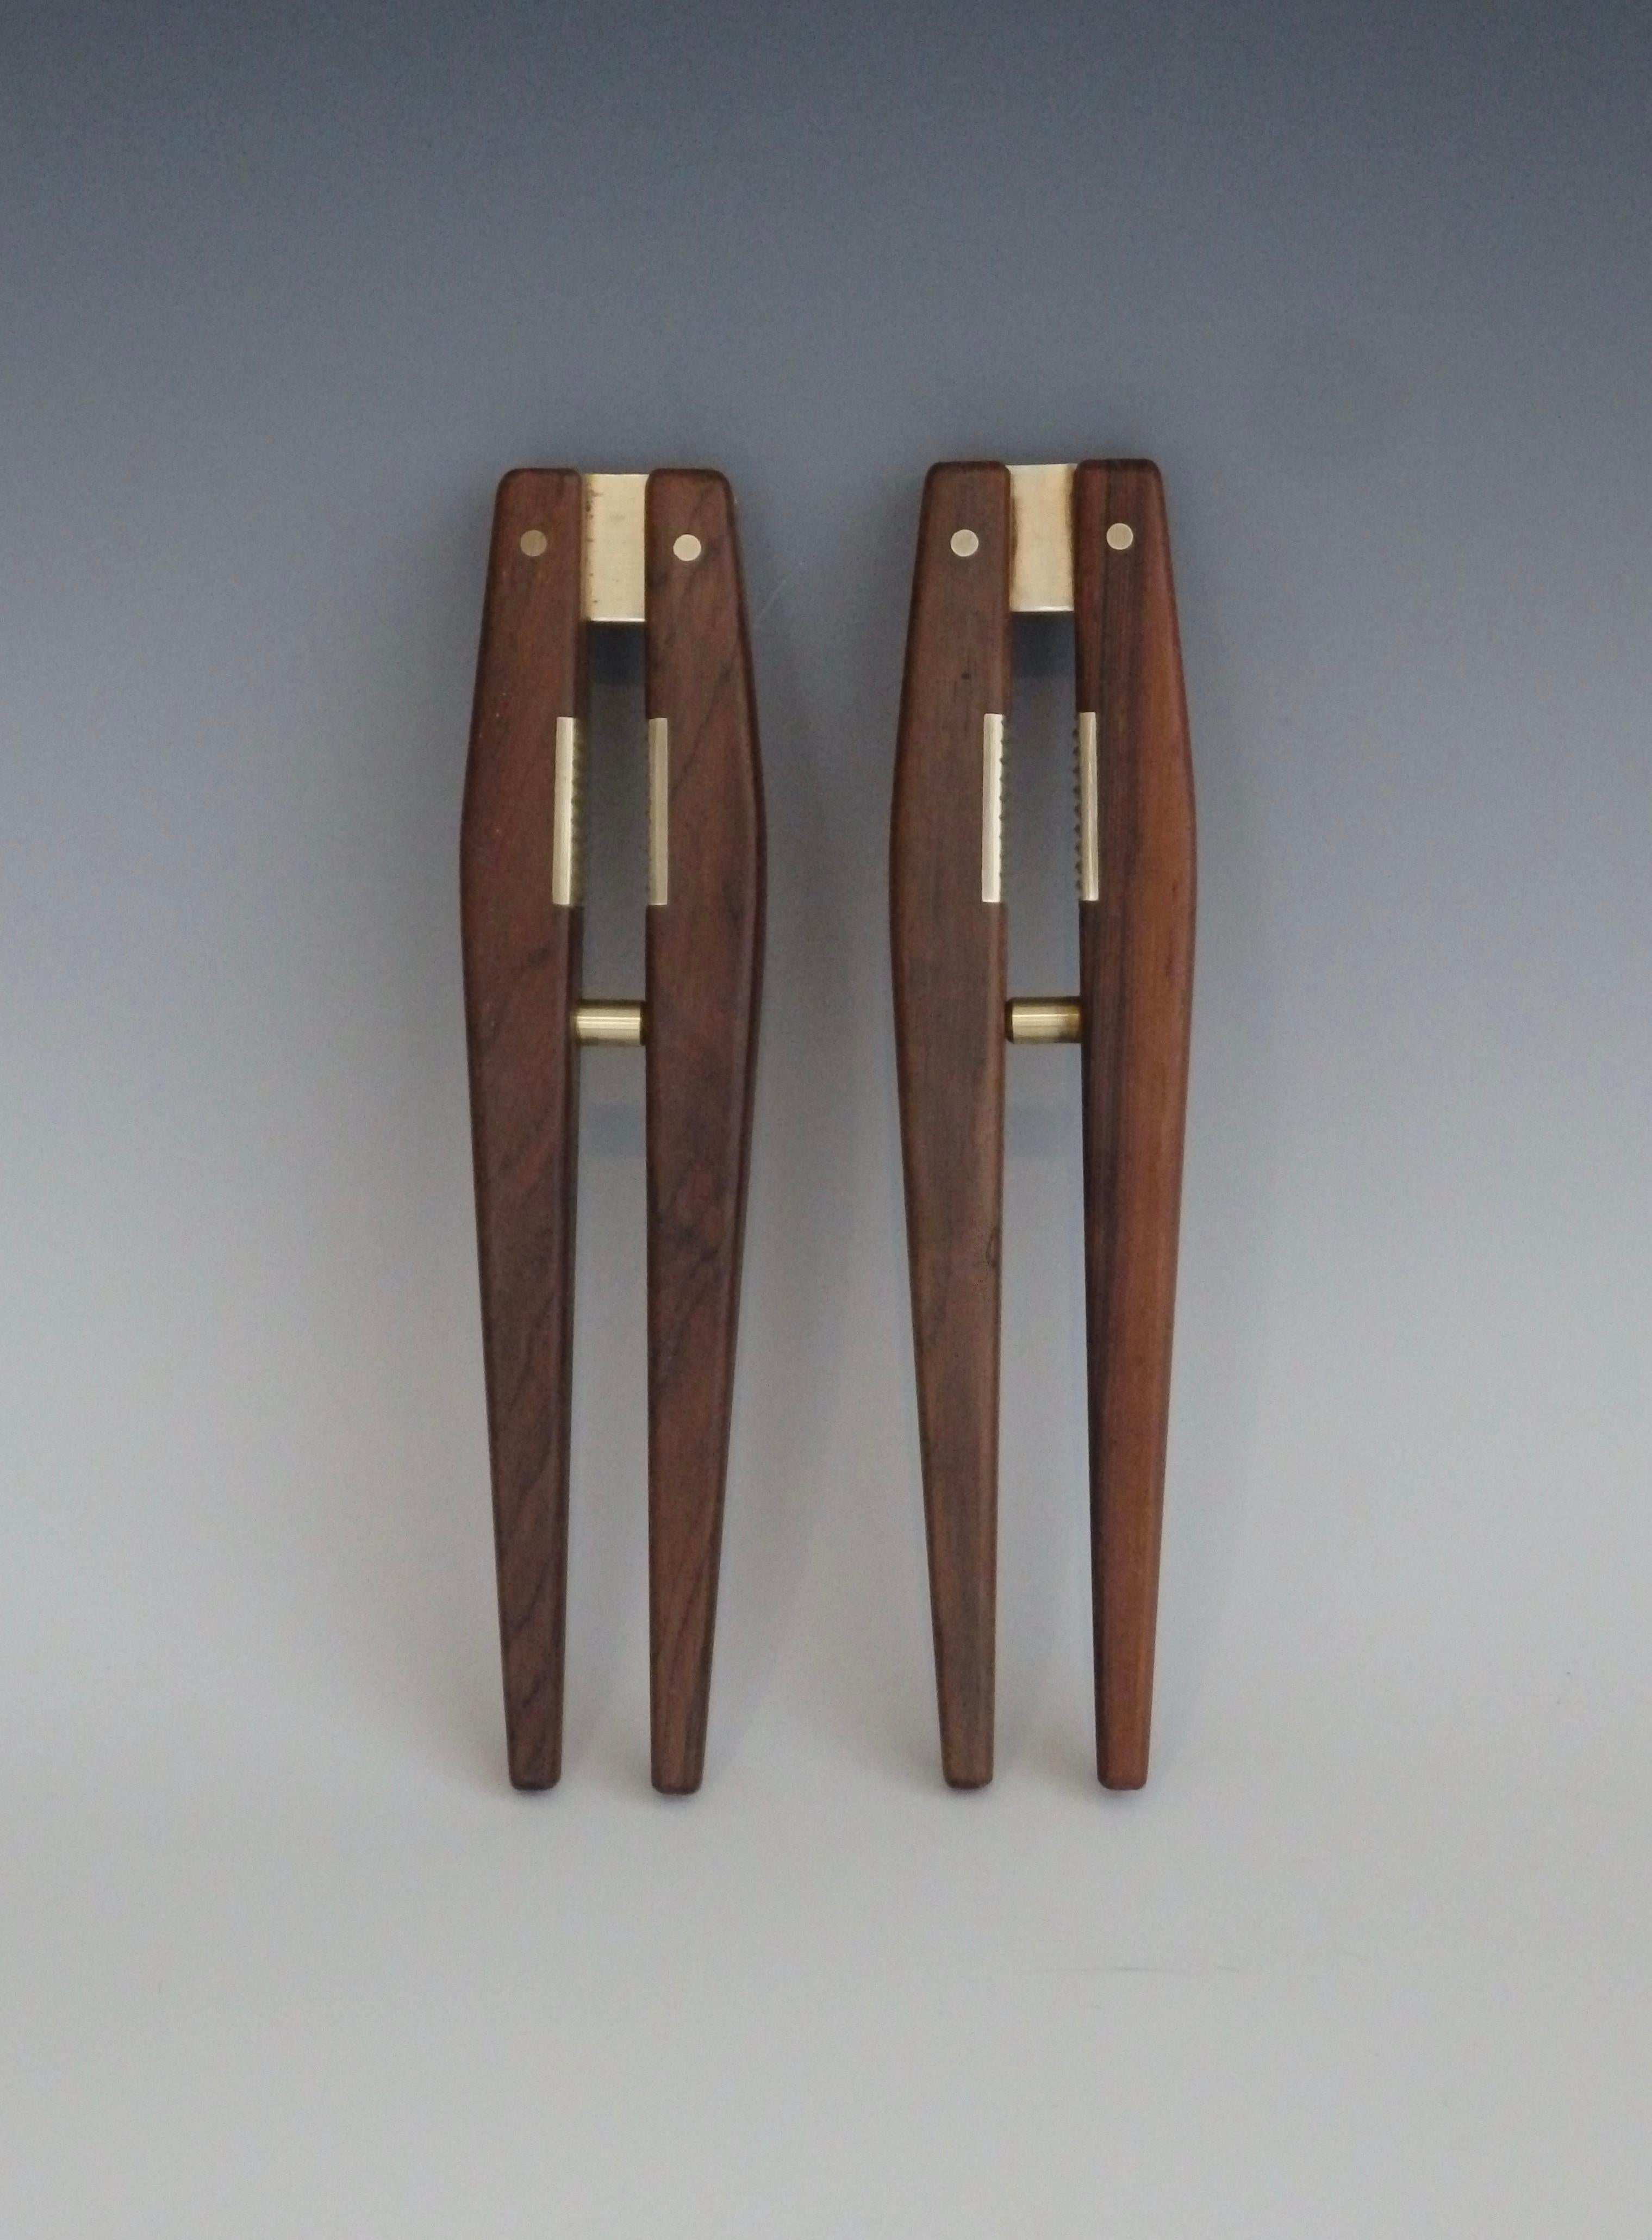 Pair of Teak and Brass Nutcrackers by Paol Knudsen In Good Condition For Sale In Ferndale, MI